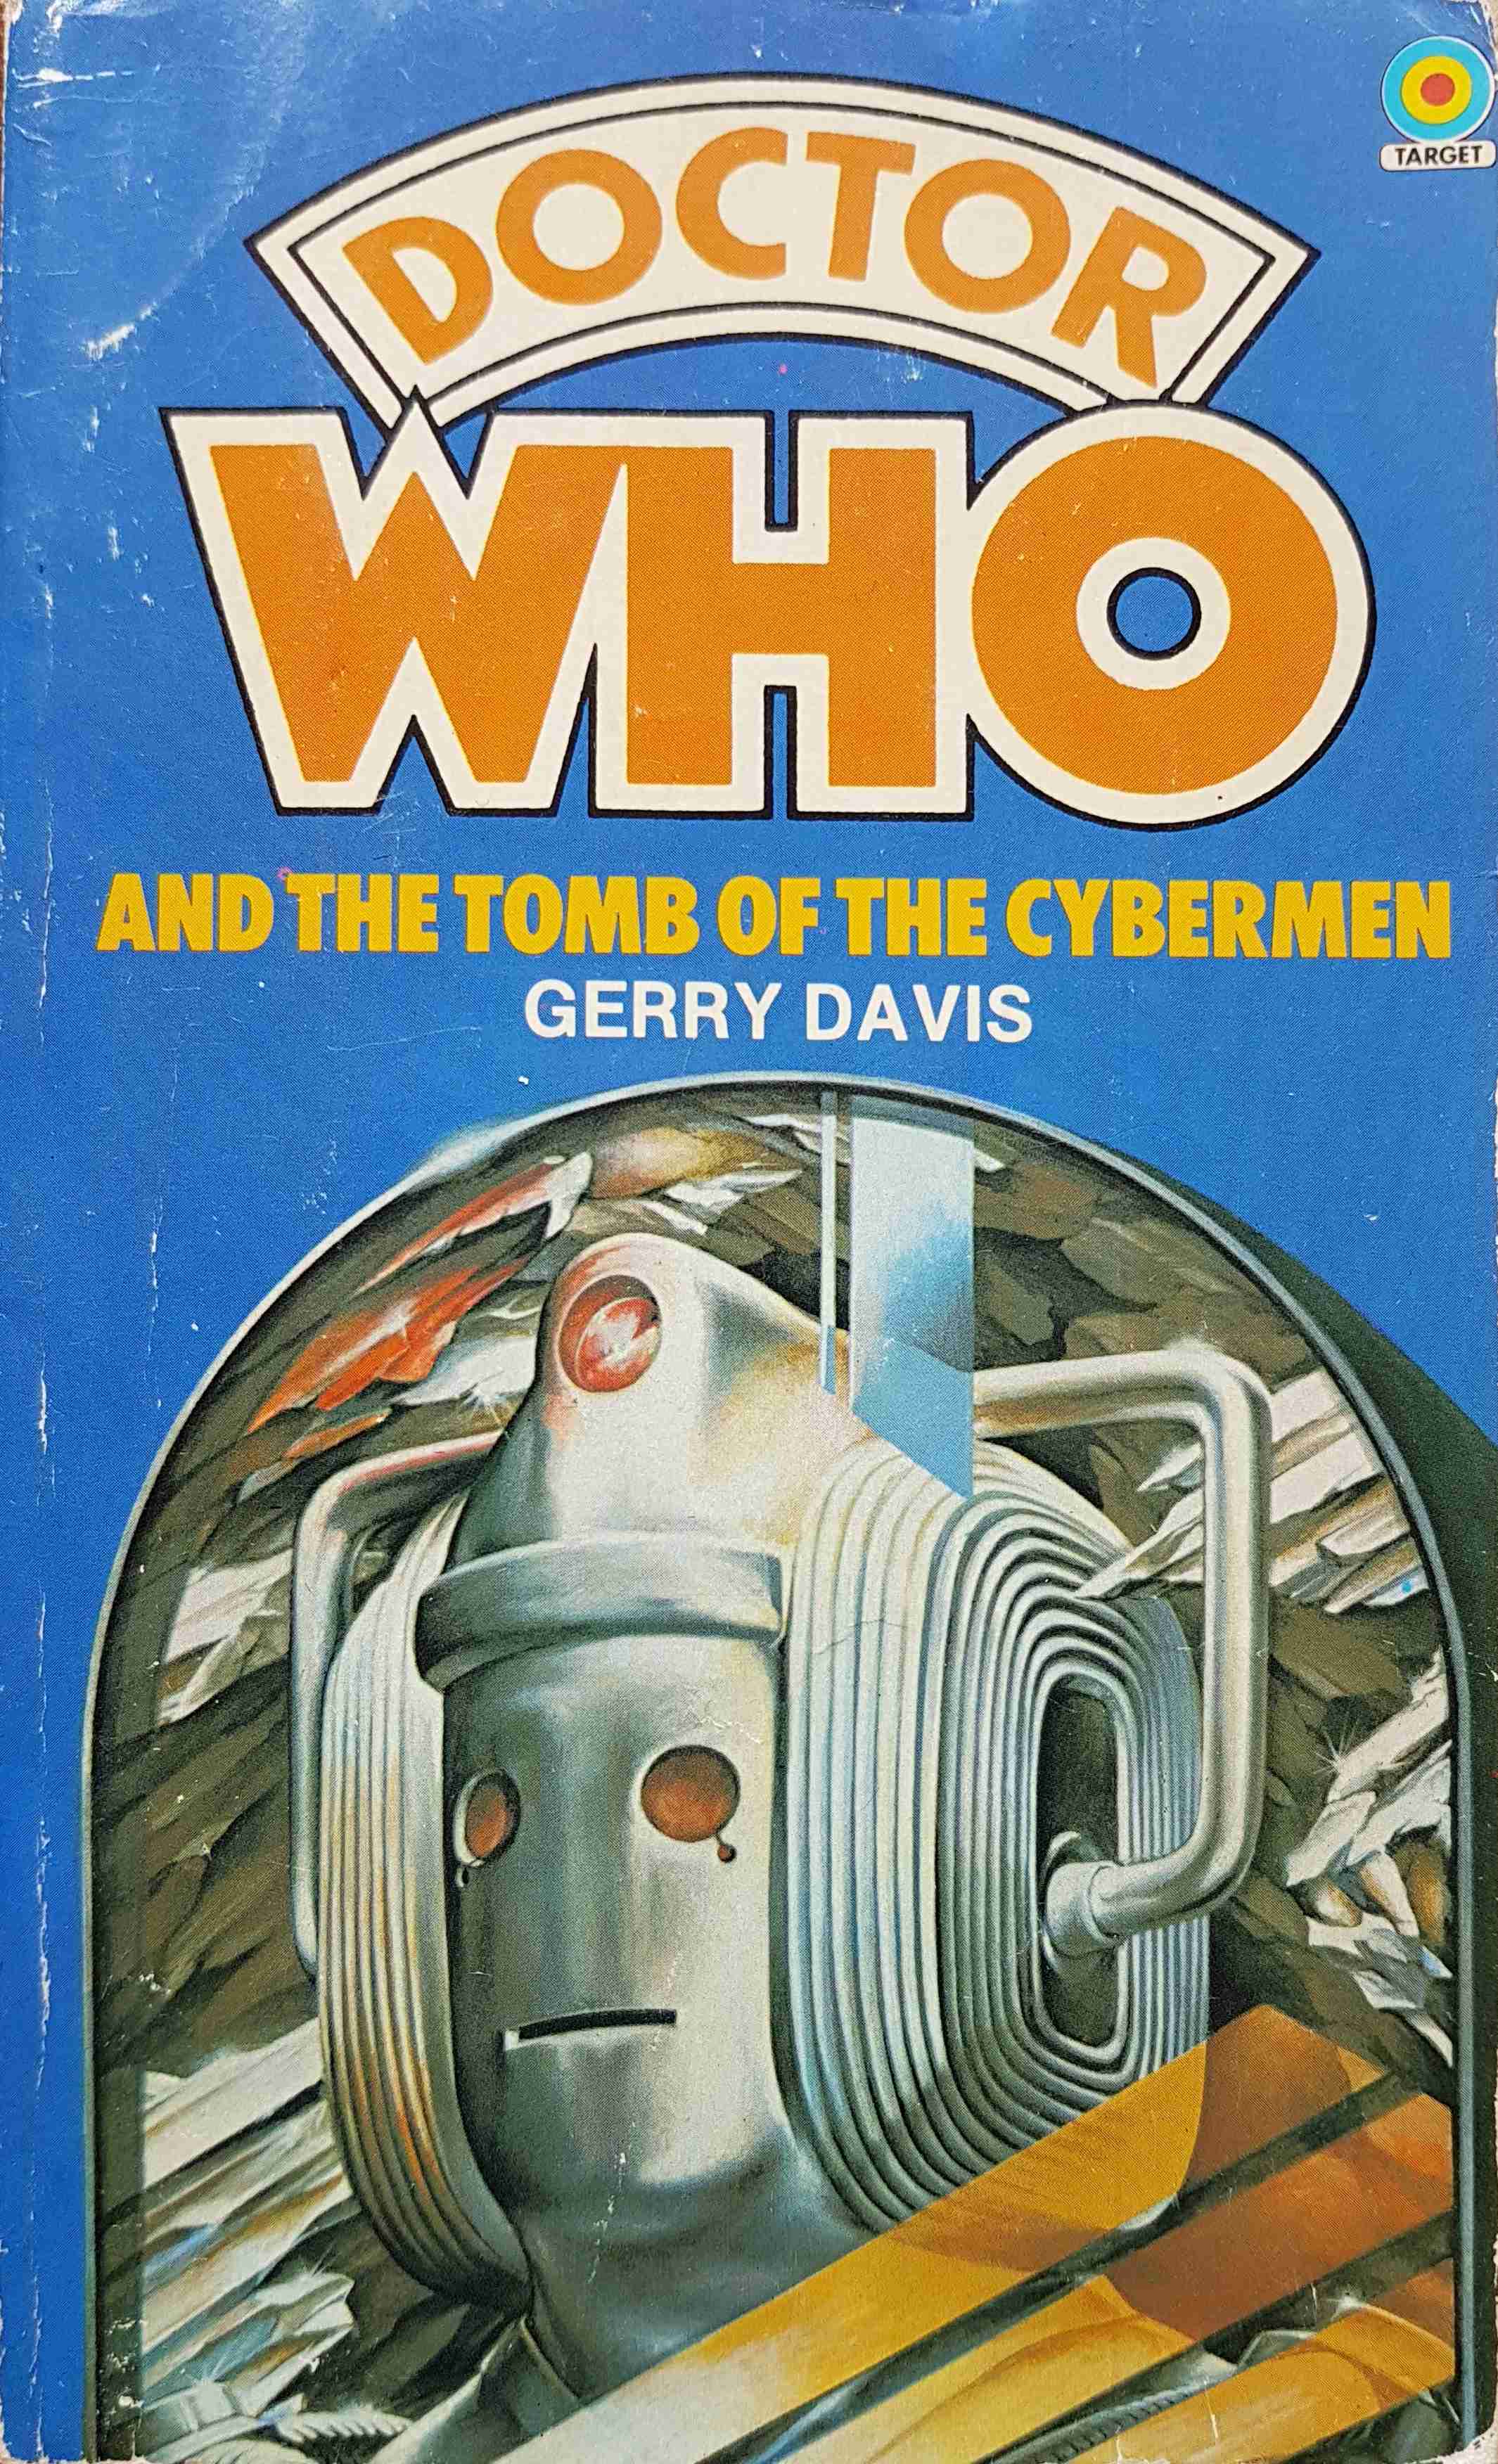 Picture of 0-426-11076-5 Doctor Who - Tomb of the Cybermen by artist Gerry Davis from the BBC records and Tapes library